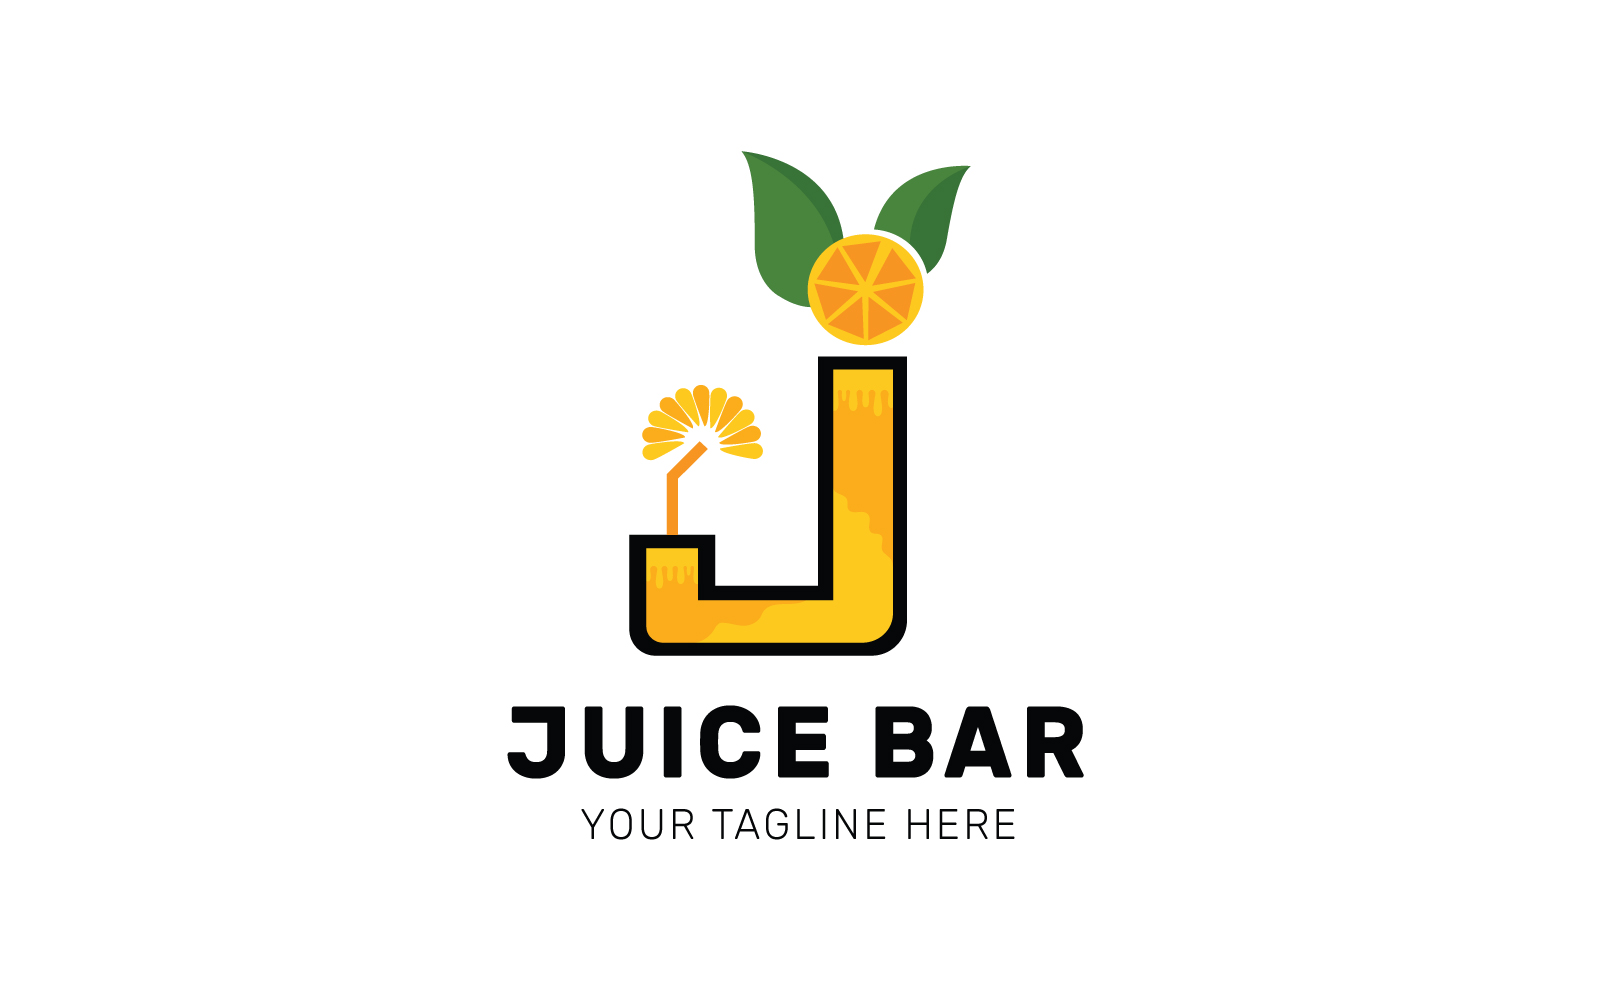 Juice Bar Logo Design Inspiration Isolated On White Background Royalty Free  SVG, Cliparts, Vectors, and Stock Illustration. Image 118885874.